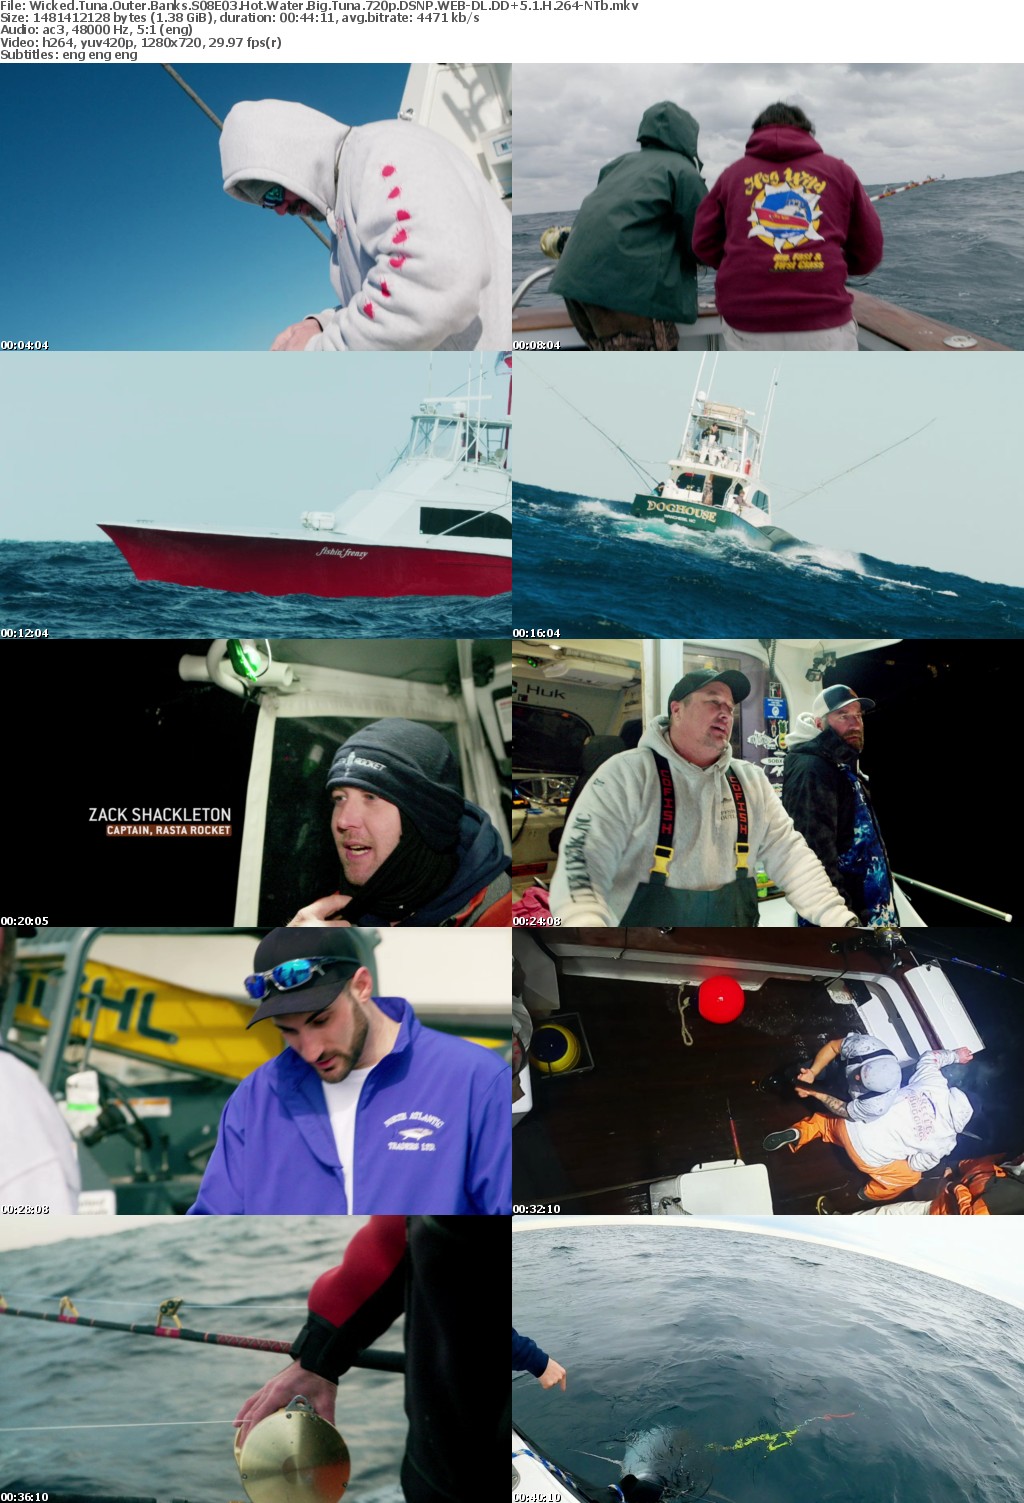 Wicked Tuna Outer Banks S08E03 Hot Water Big Tuna 720p DSNP WEBRip DDP5 1 x264-NTb